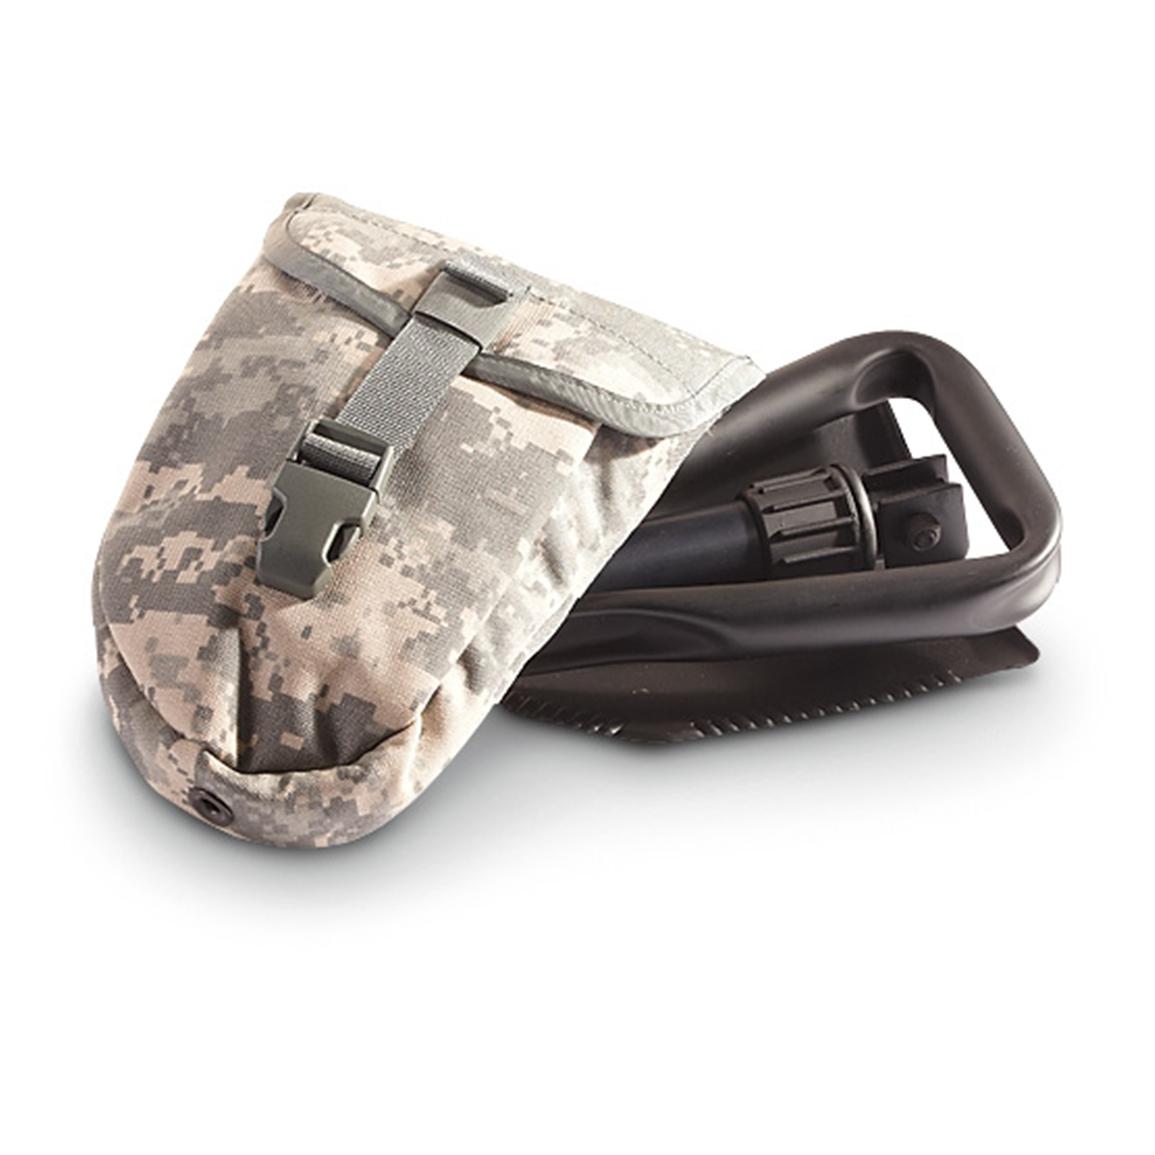 Includes nylon carry pouch, ACU